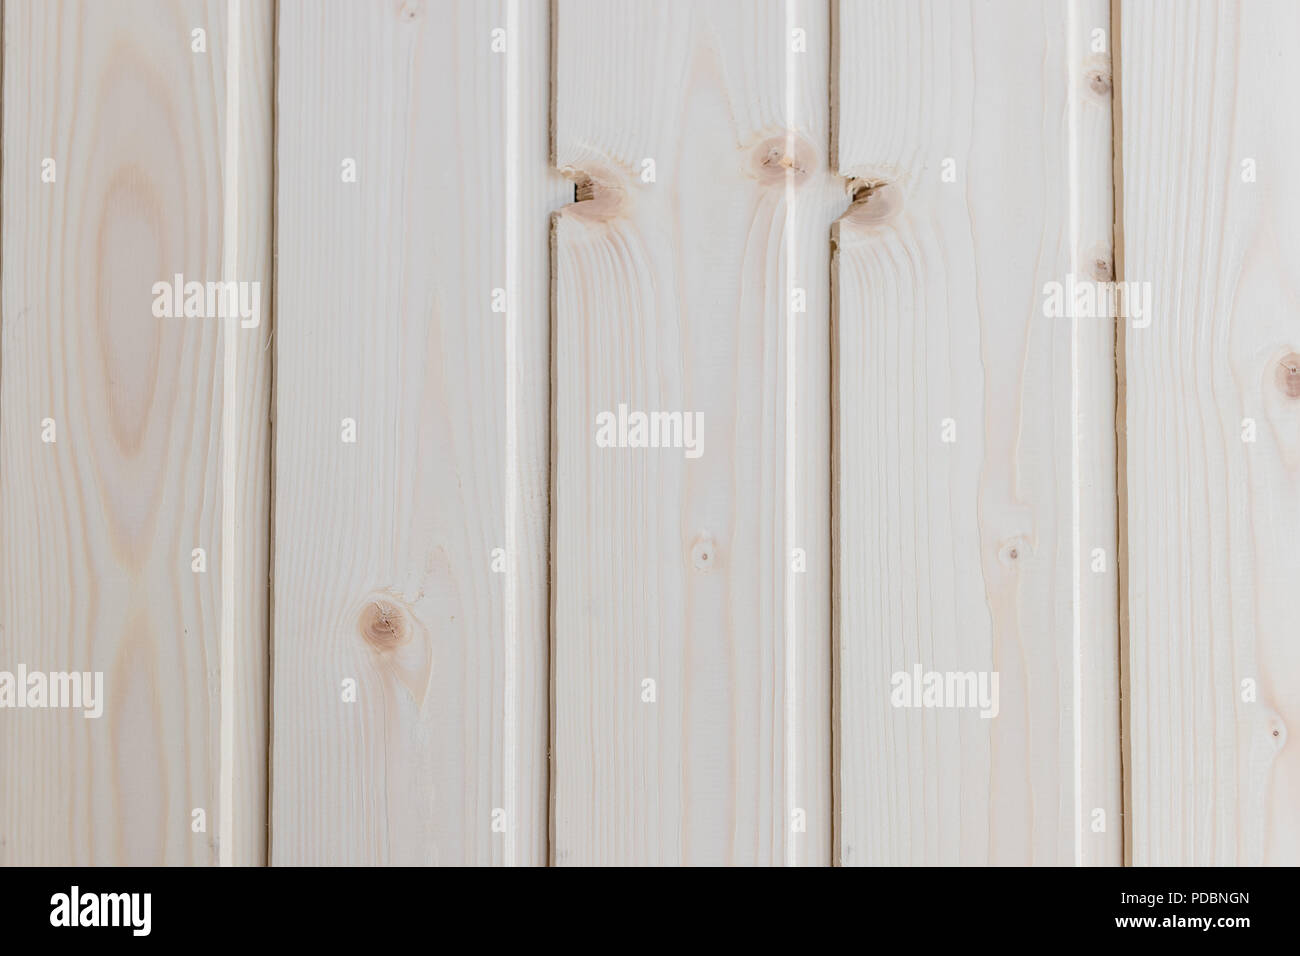 Abstract bright wood texture over white light natural color background Art  plain simple peel wooden grain